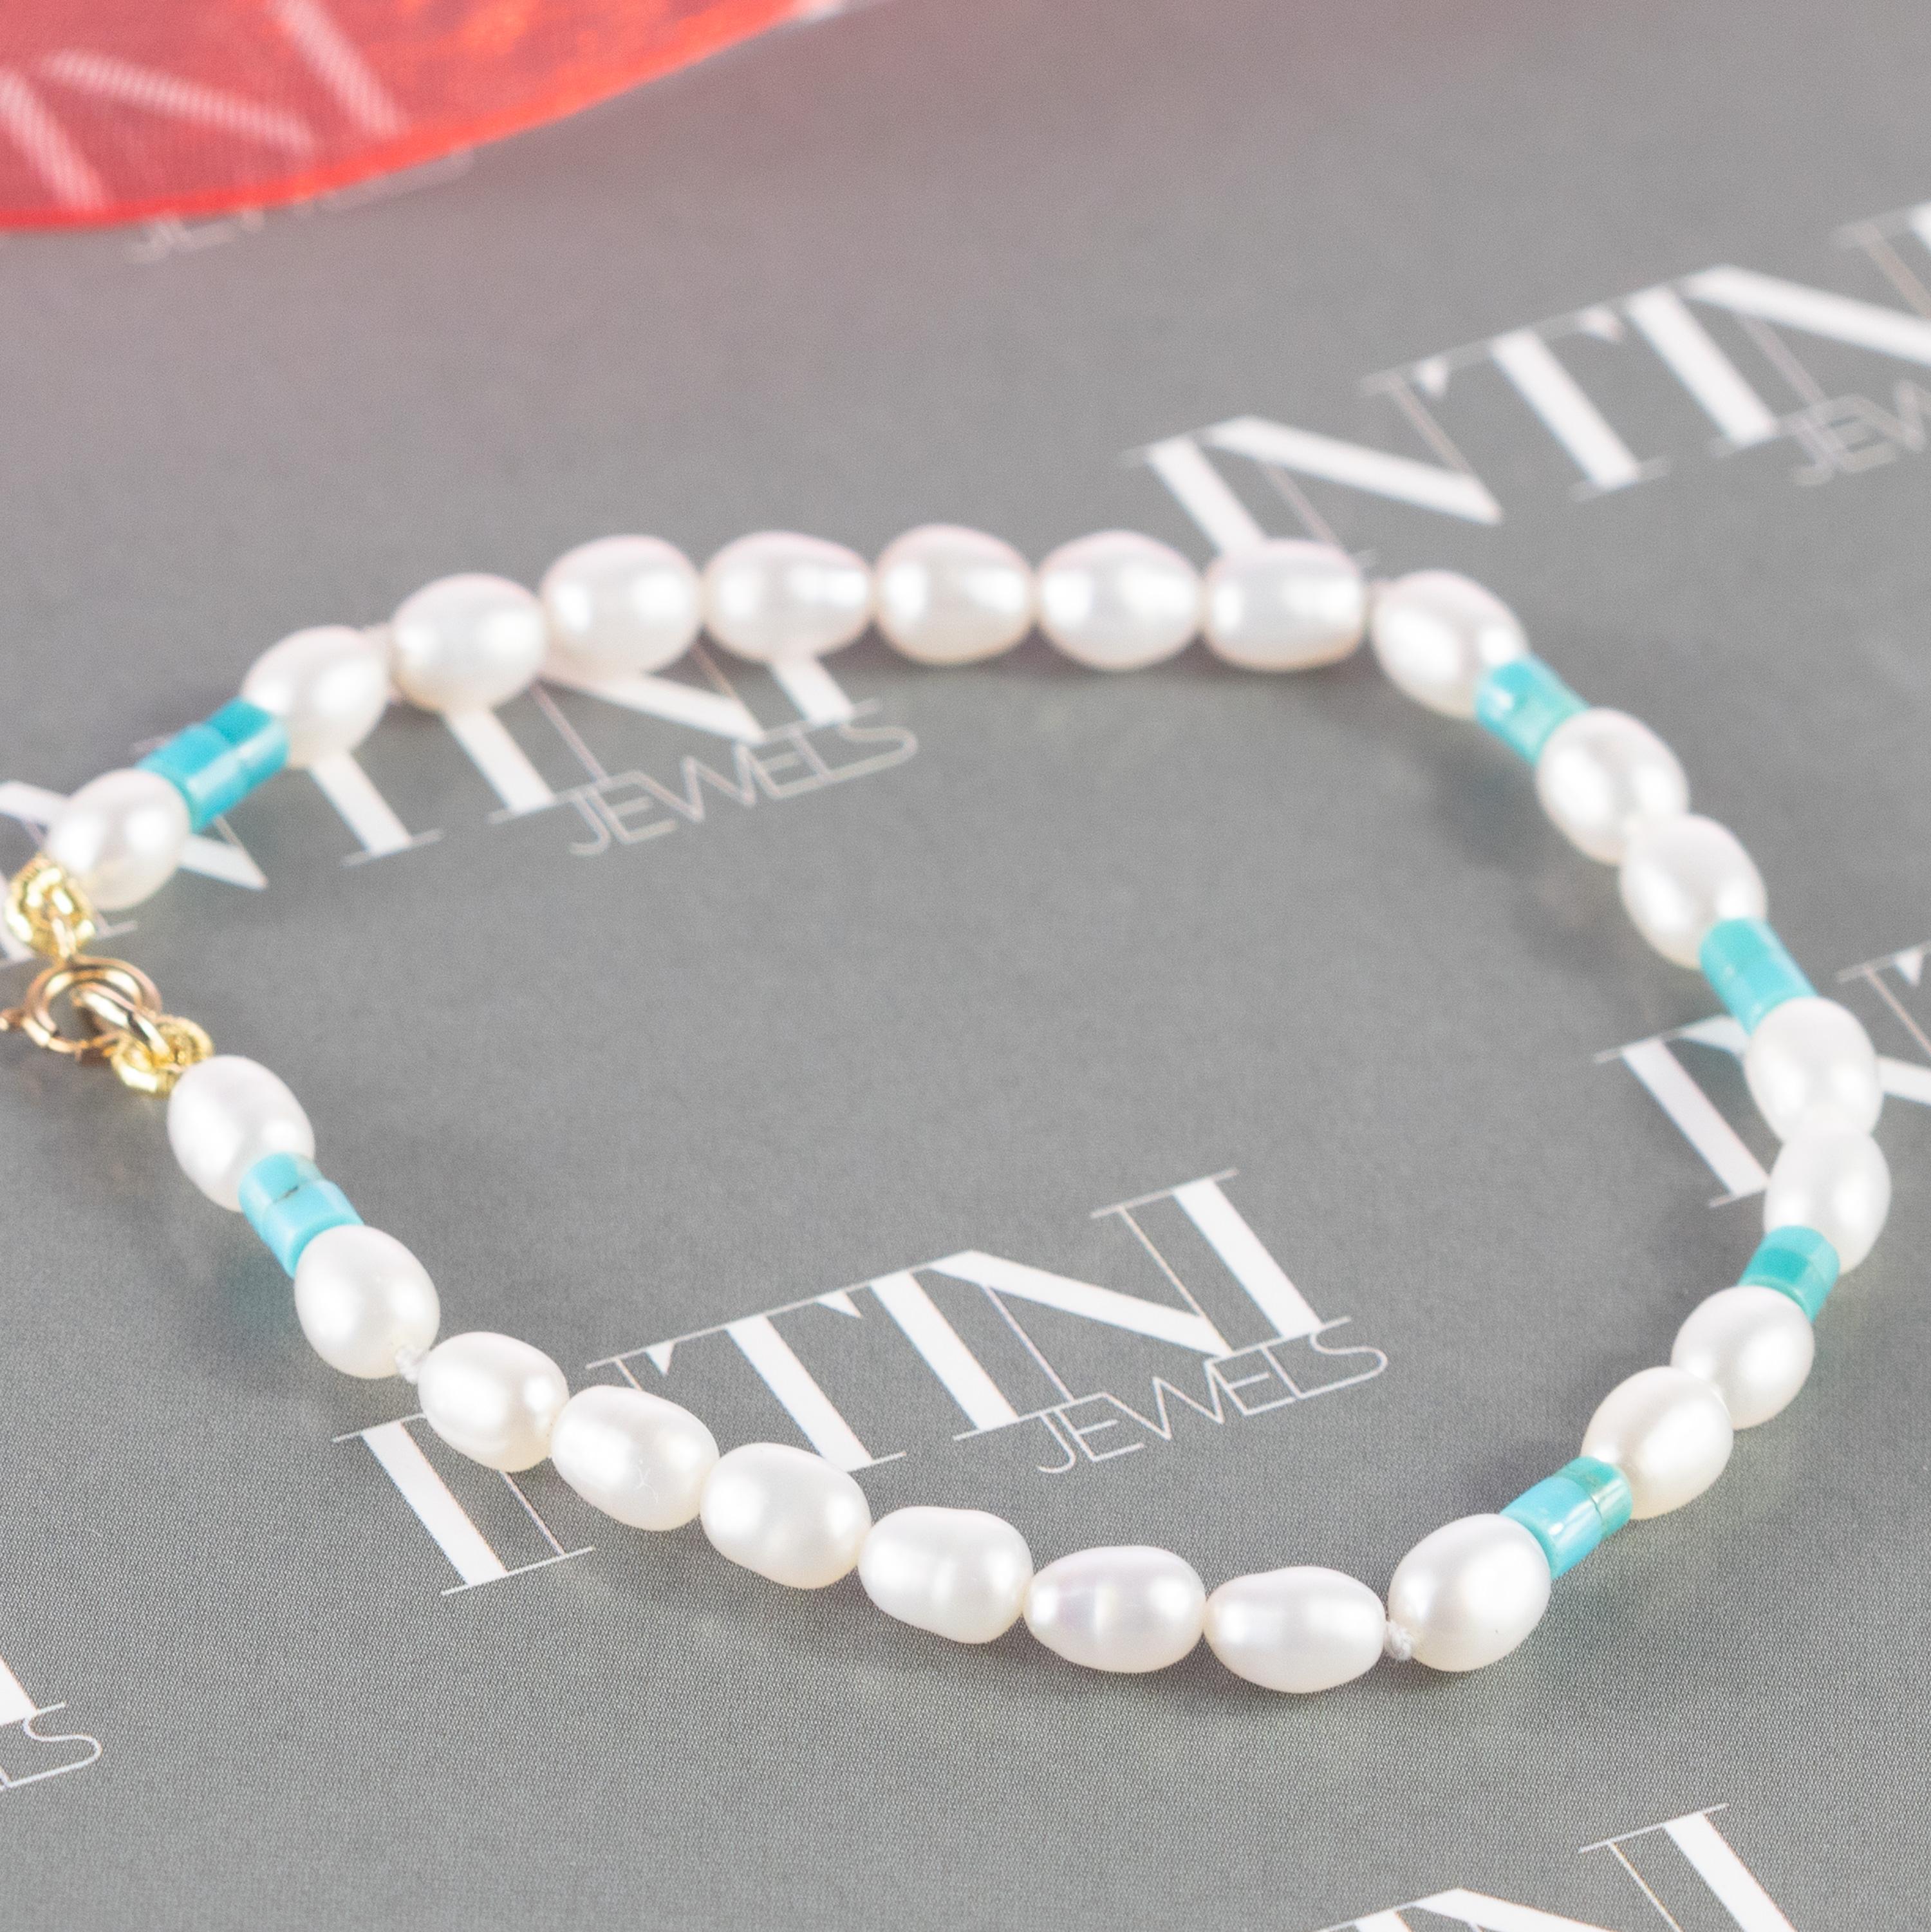 A natural turquoise and freshwater pearls bracelet full of design. A modern and delicate style for a young and fearless woman. Delight yourself with a luminous handmade jewelry. Natural precious stones beads with a 18 karat yellow gold closure. The